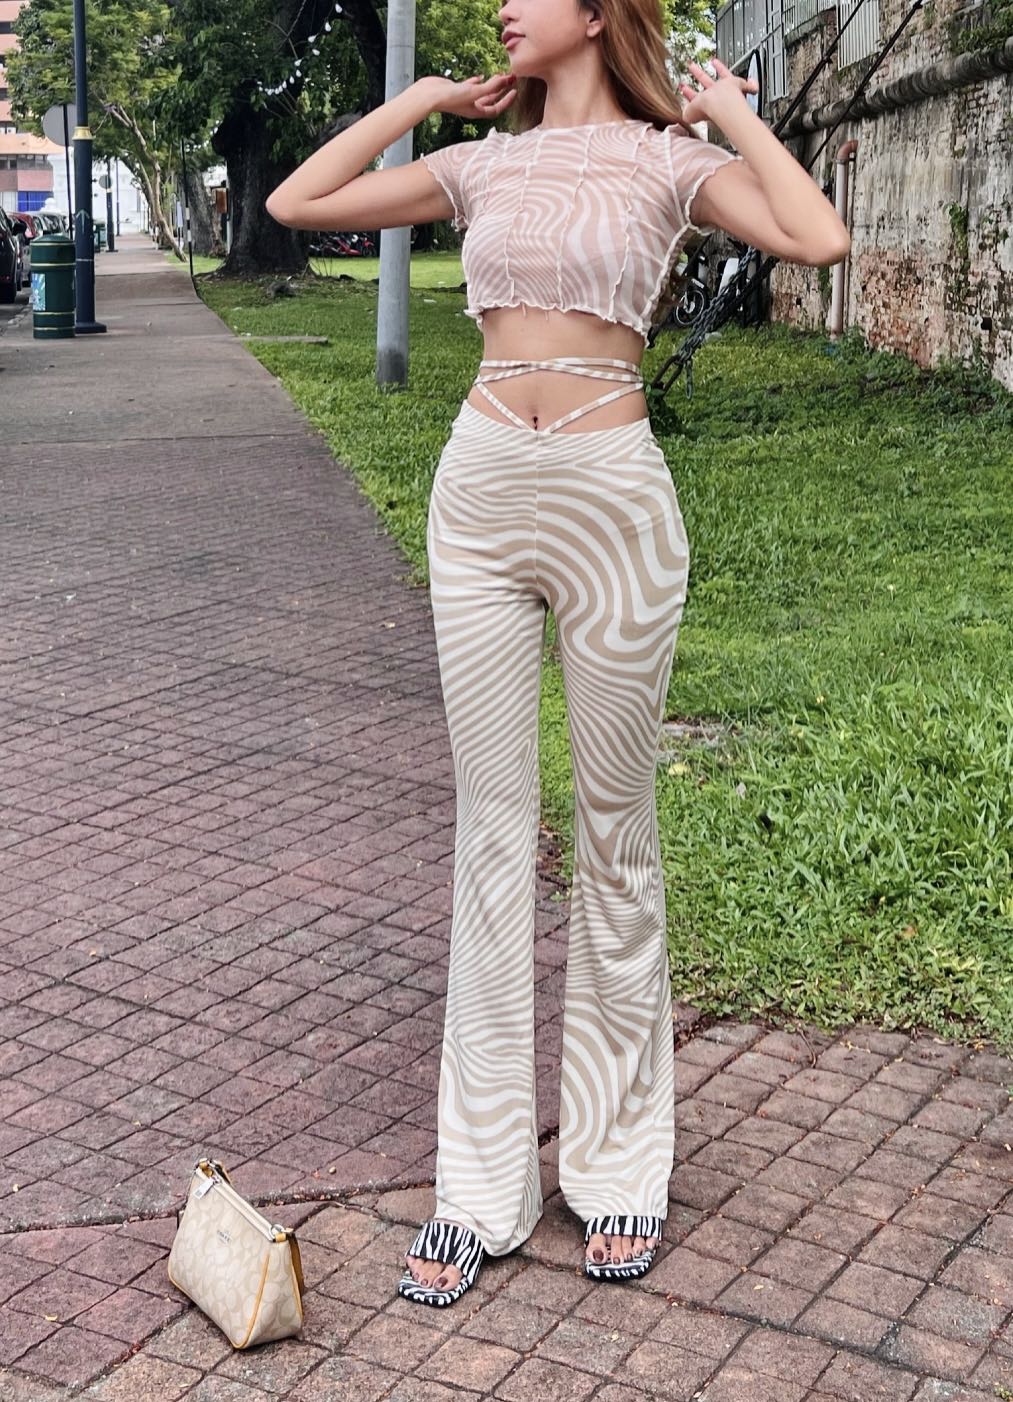 https://media.karousell.com/media/photos/products/2022/6/21/hm_flared_leggings_and_croptop_1655829170_967bf822.jpg